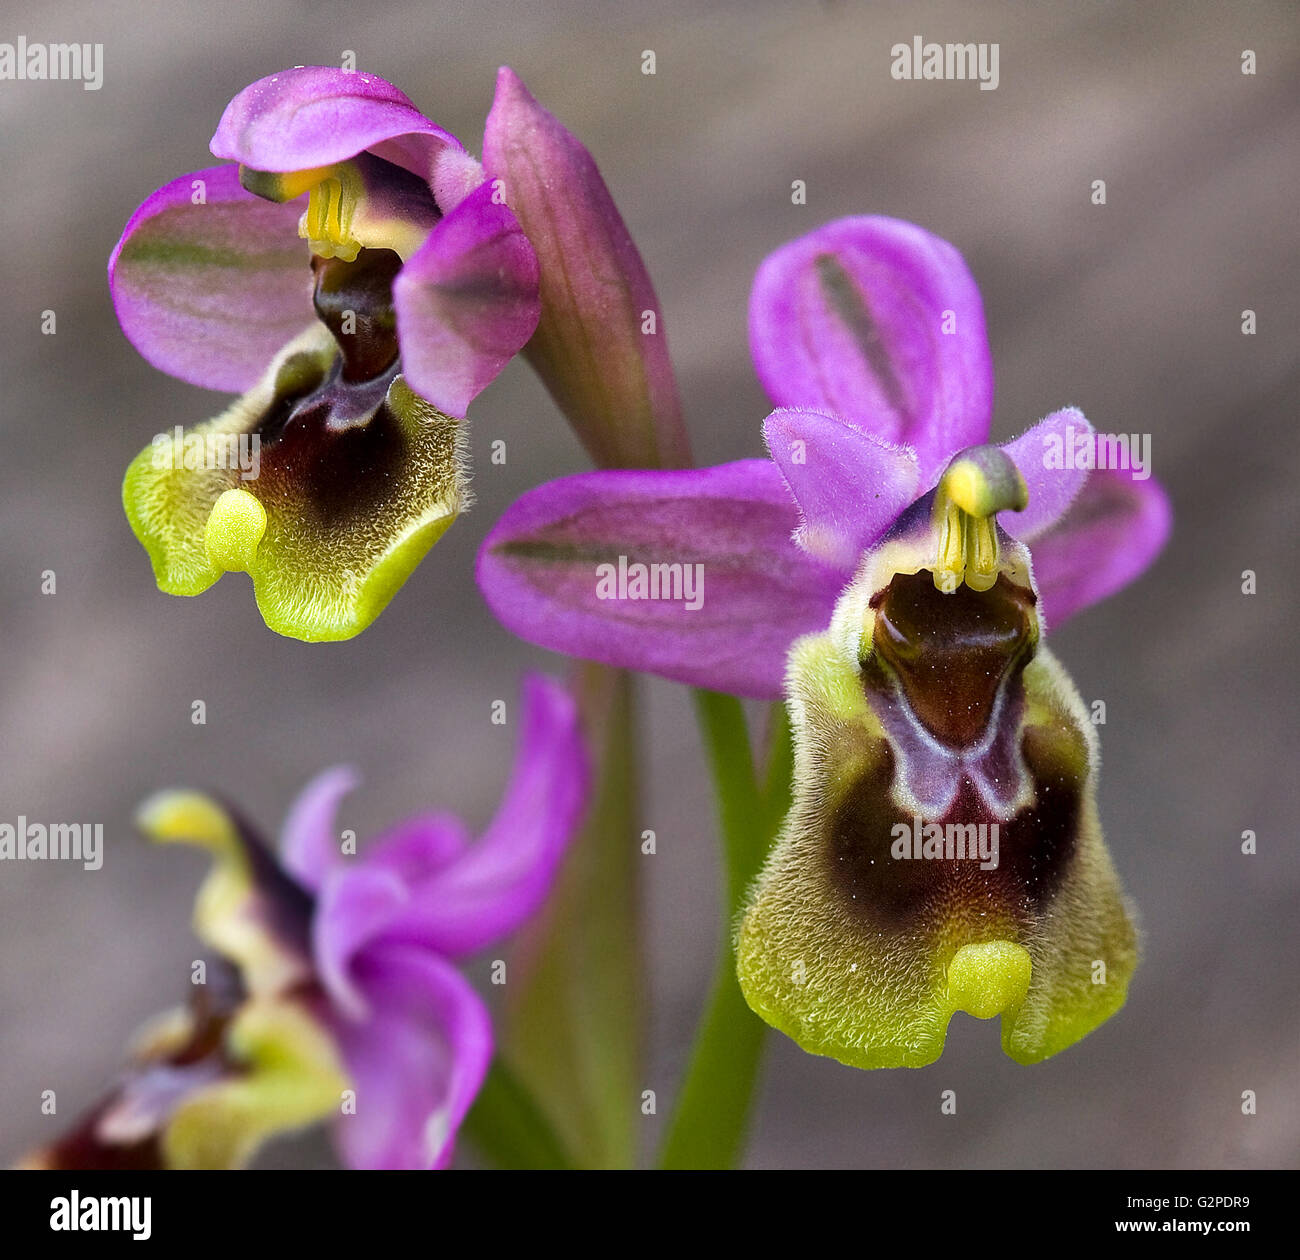 Sawfly orchid. Ophrys tenthredinifera. Stock Photo